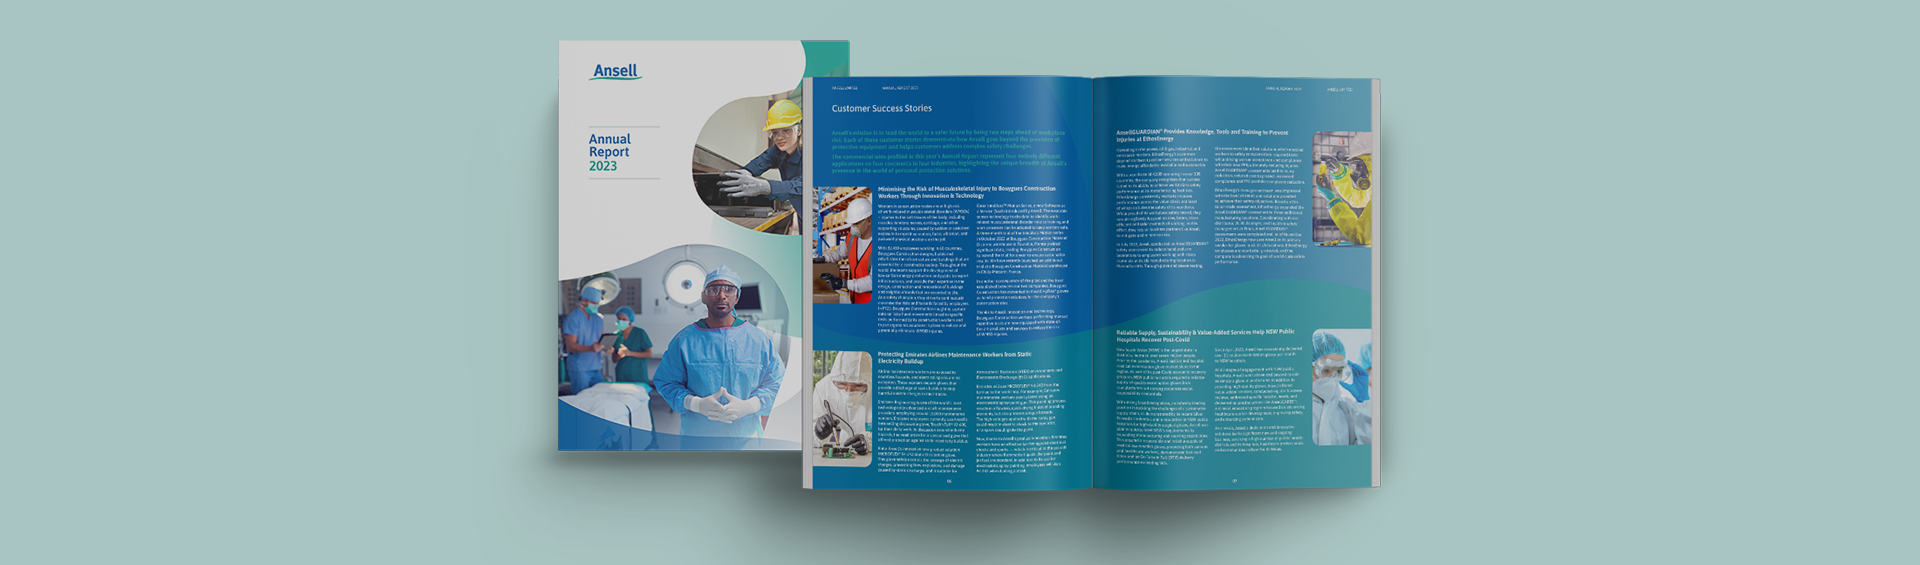 Splayed pages of the Ansell annual report against a baby blue background, with images of text, gloves and healthcare workers.